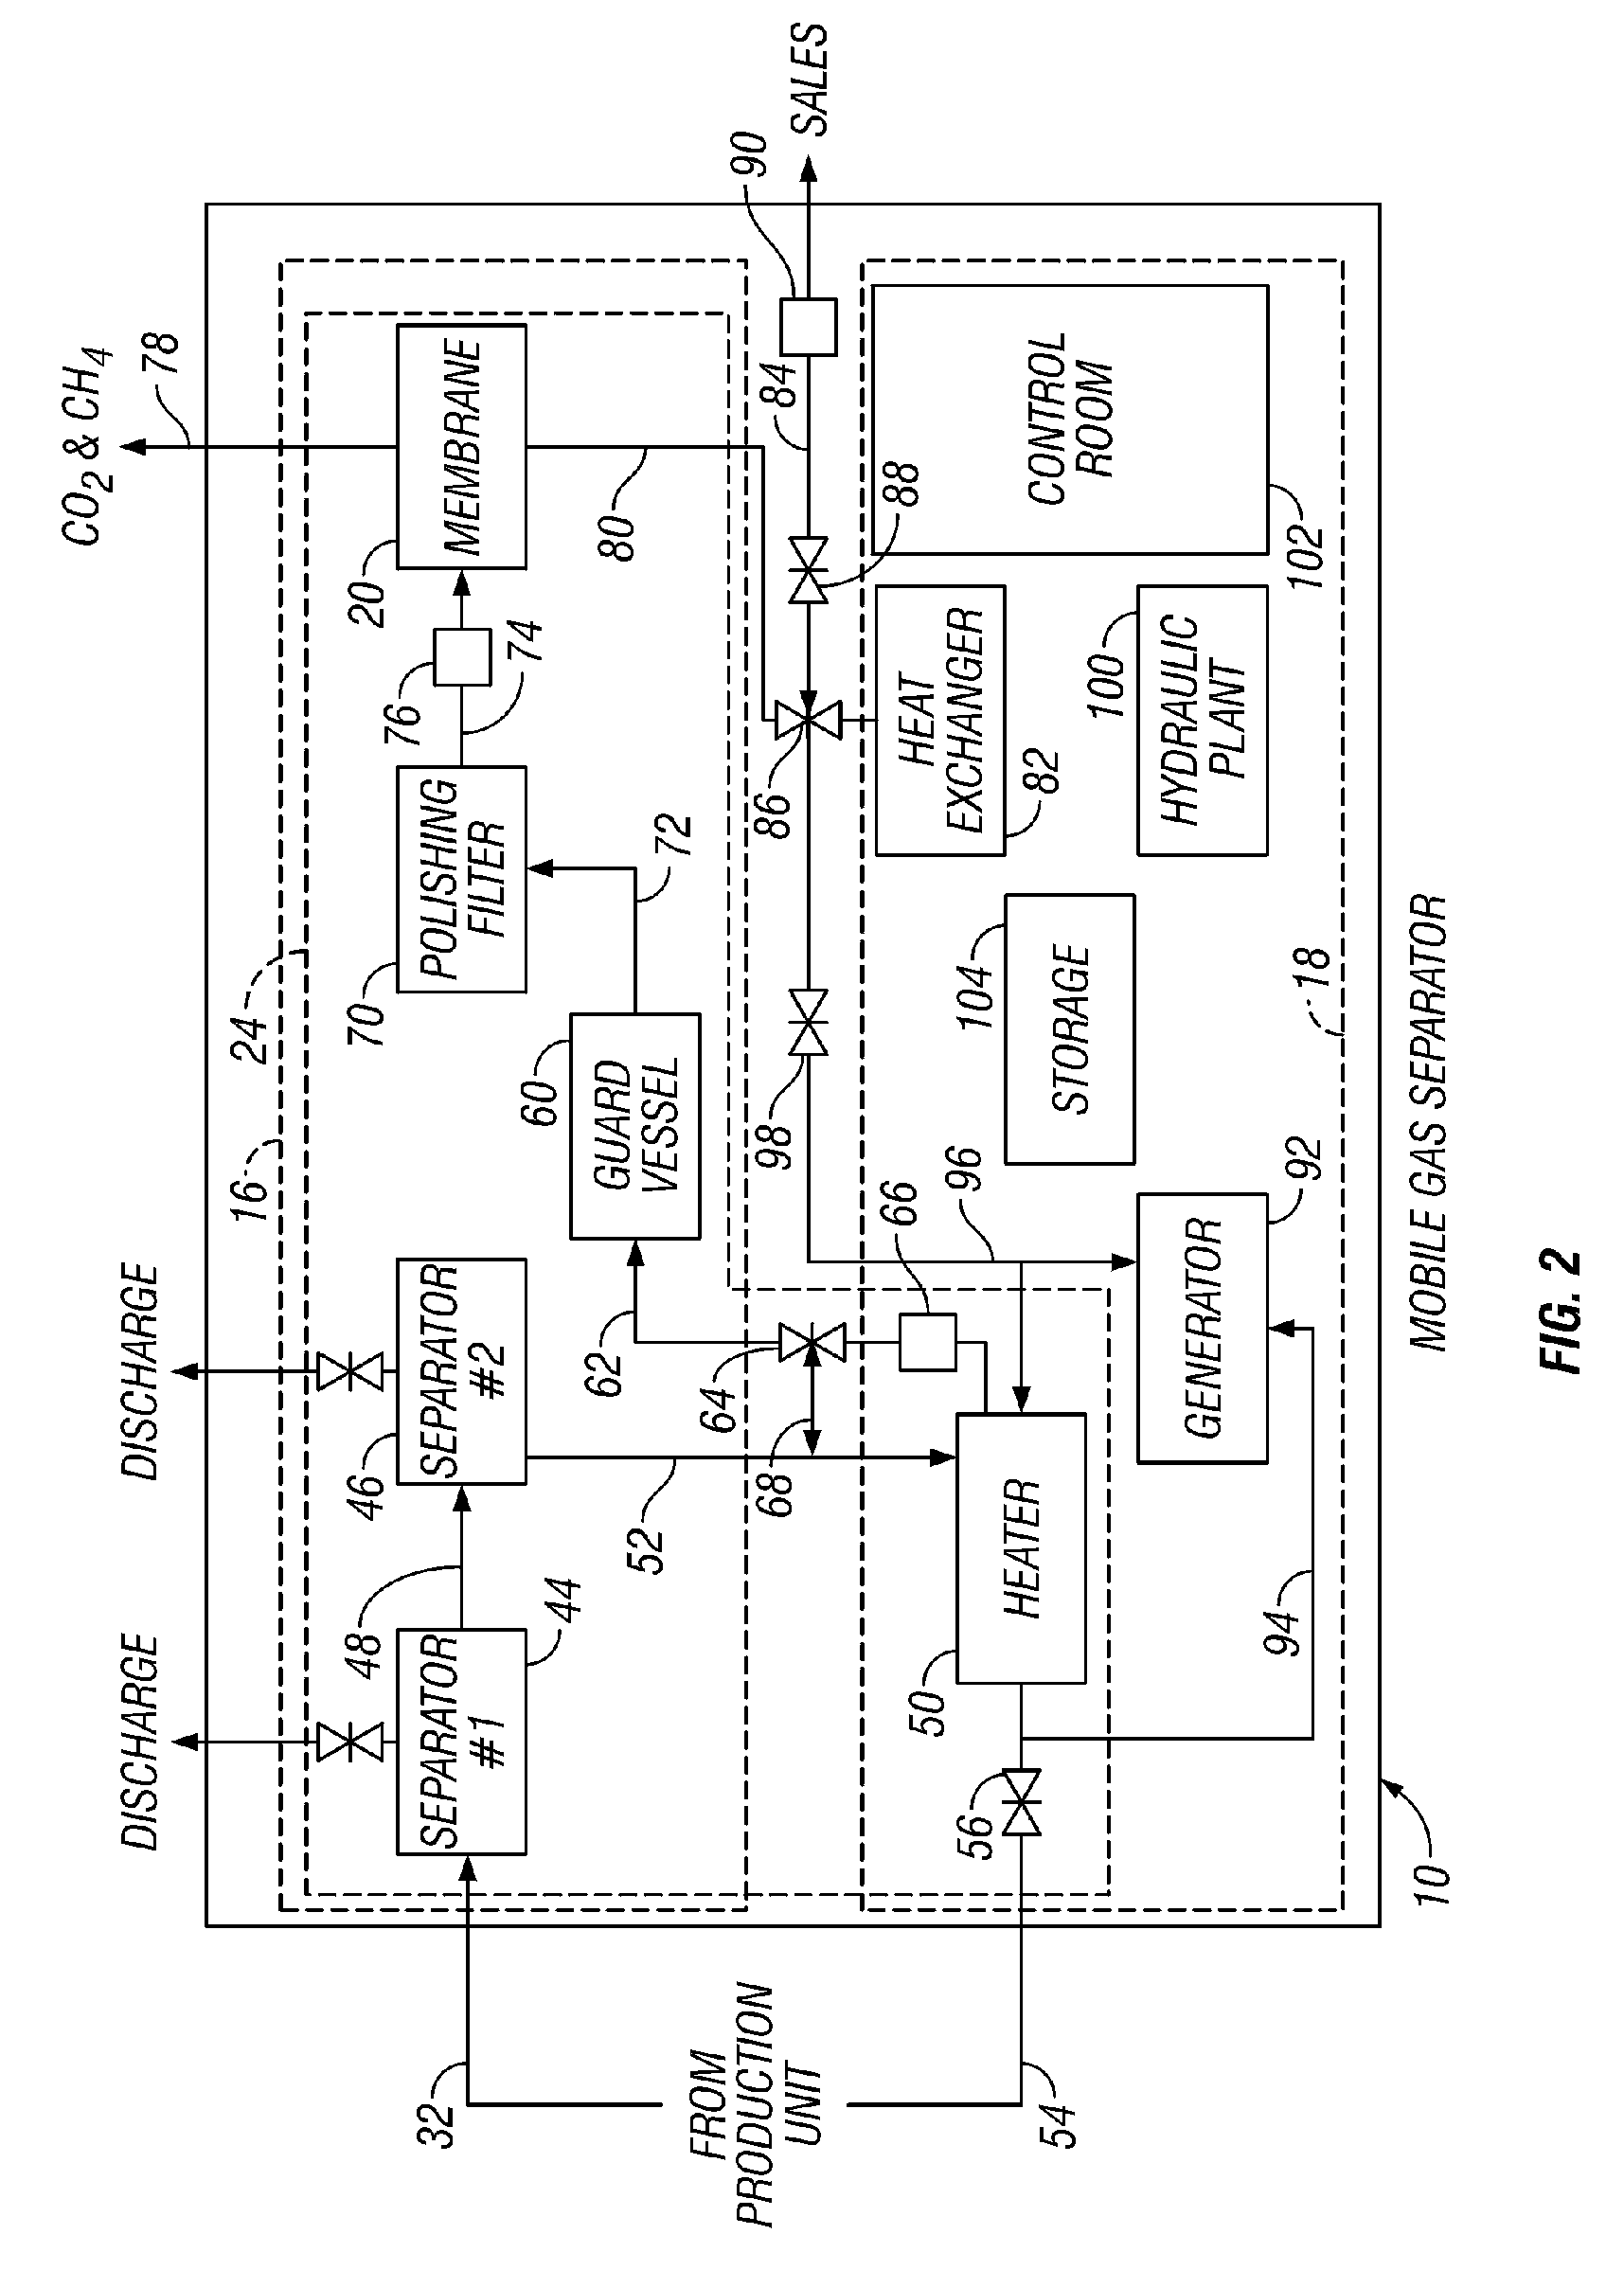 Mobile gas separator system and method for treating dirty gas at the well site of a stimulated gas well